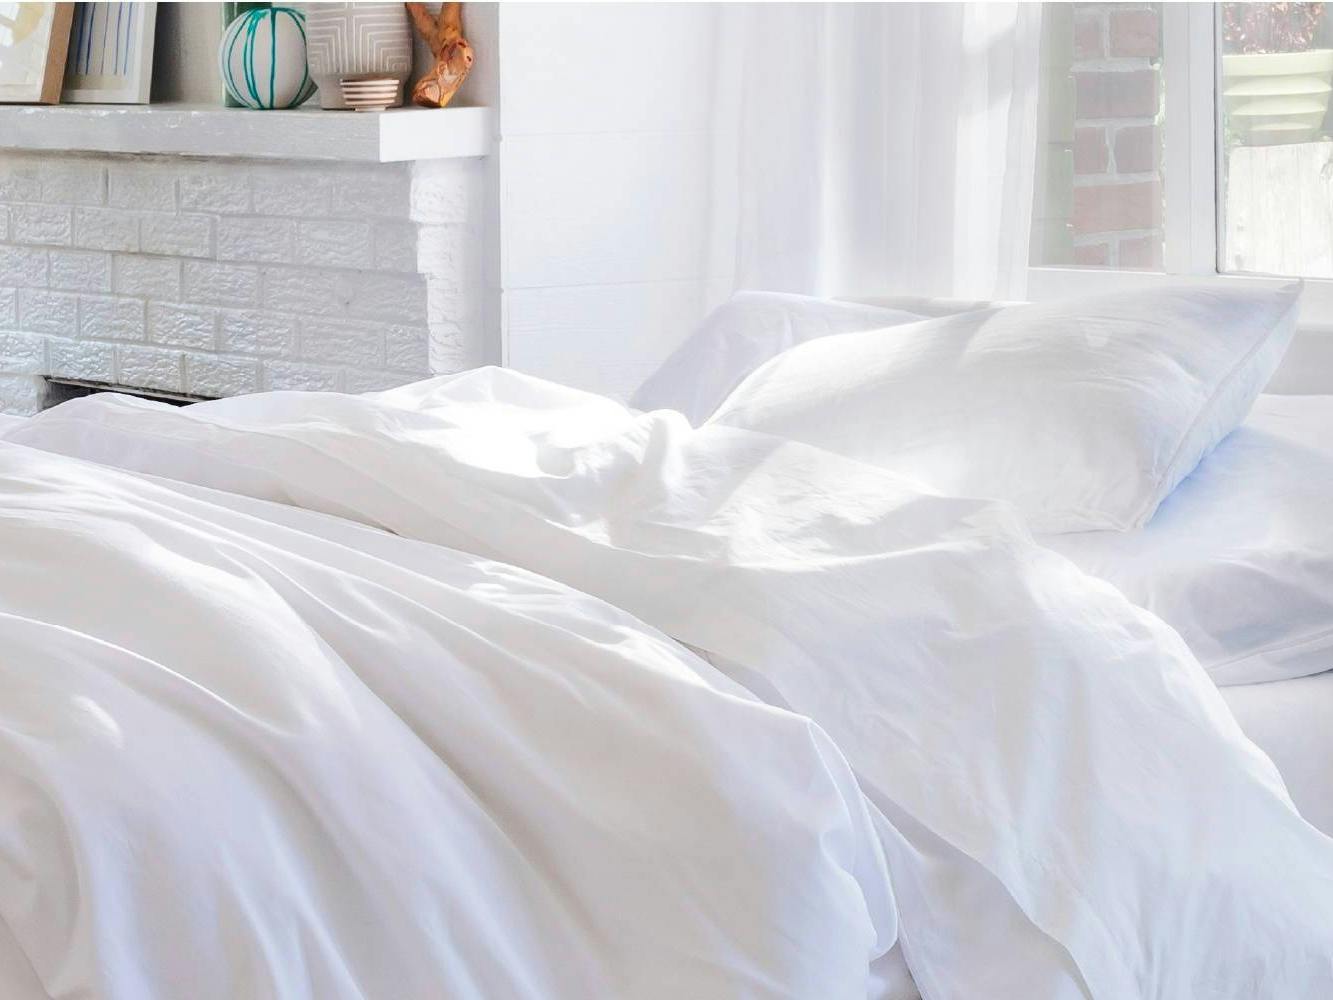 white_bedding_and_leesa_pillows_on_a_leesa_mattress_in_a_white_decorated_room1